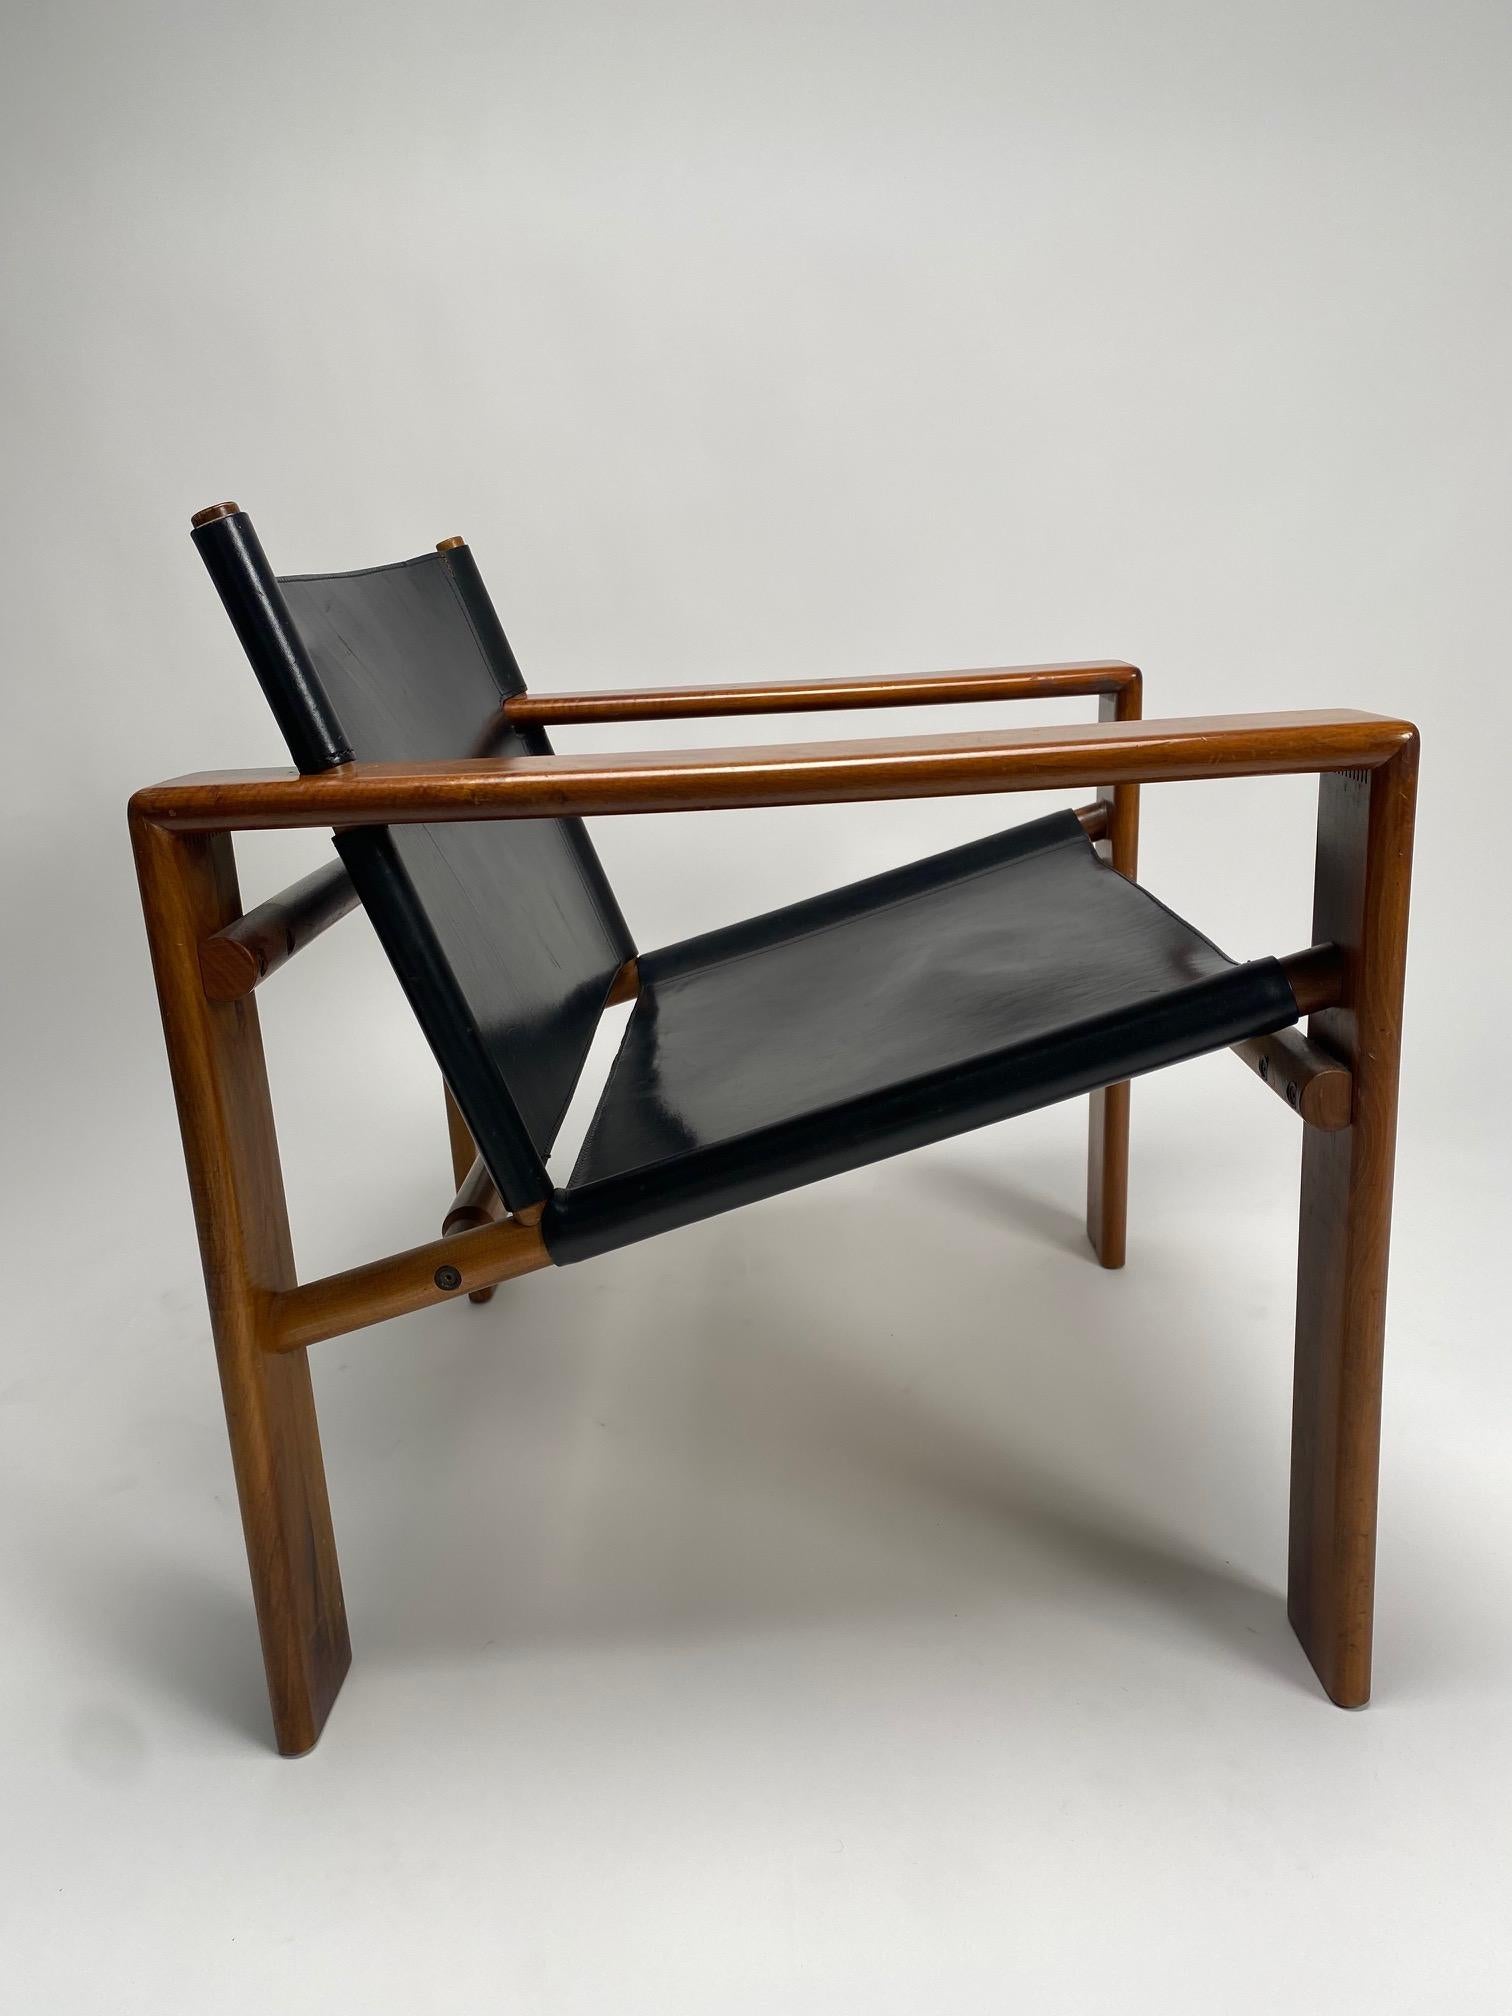 Tarcisio colzani, Pair of armchairs in wood and black leather, Italy, 1960s.

It is one of the most iconic works of the Italian designer Tarcisio Colzani, made in Italy in the 60s.
These are sculptural, important armchairs that adapt well to